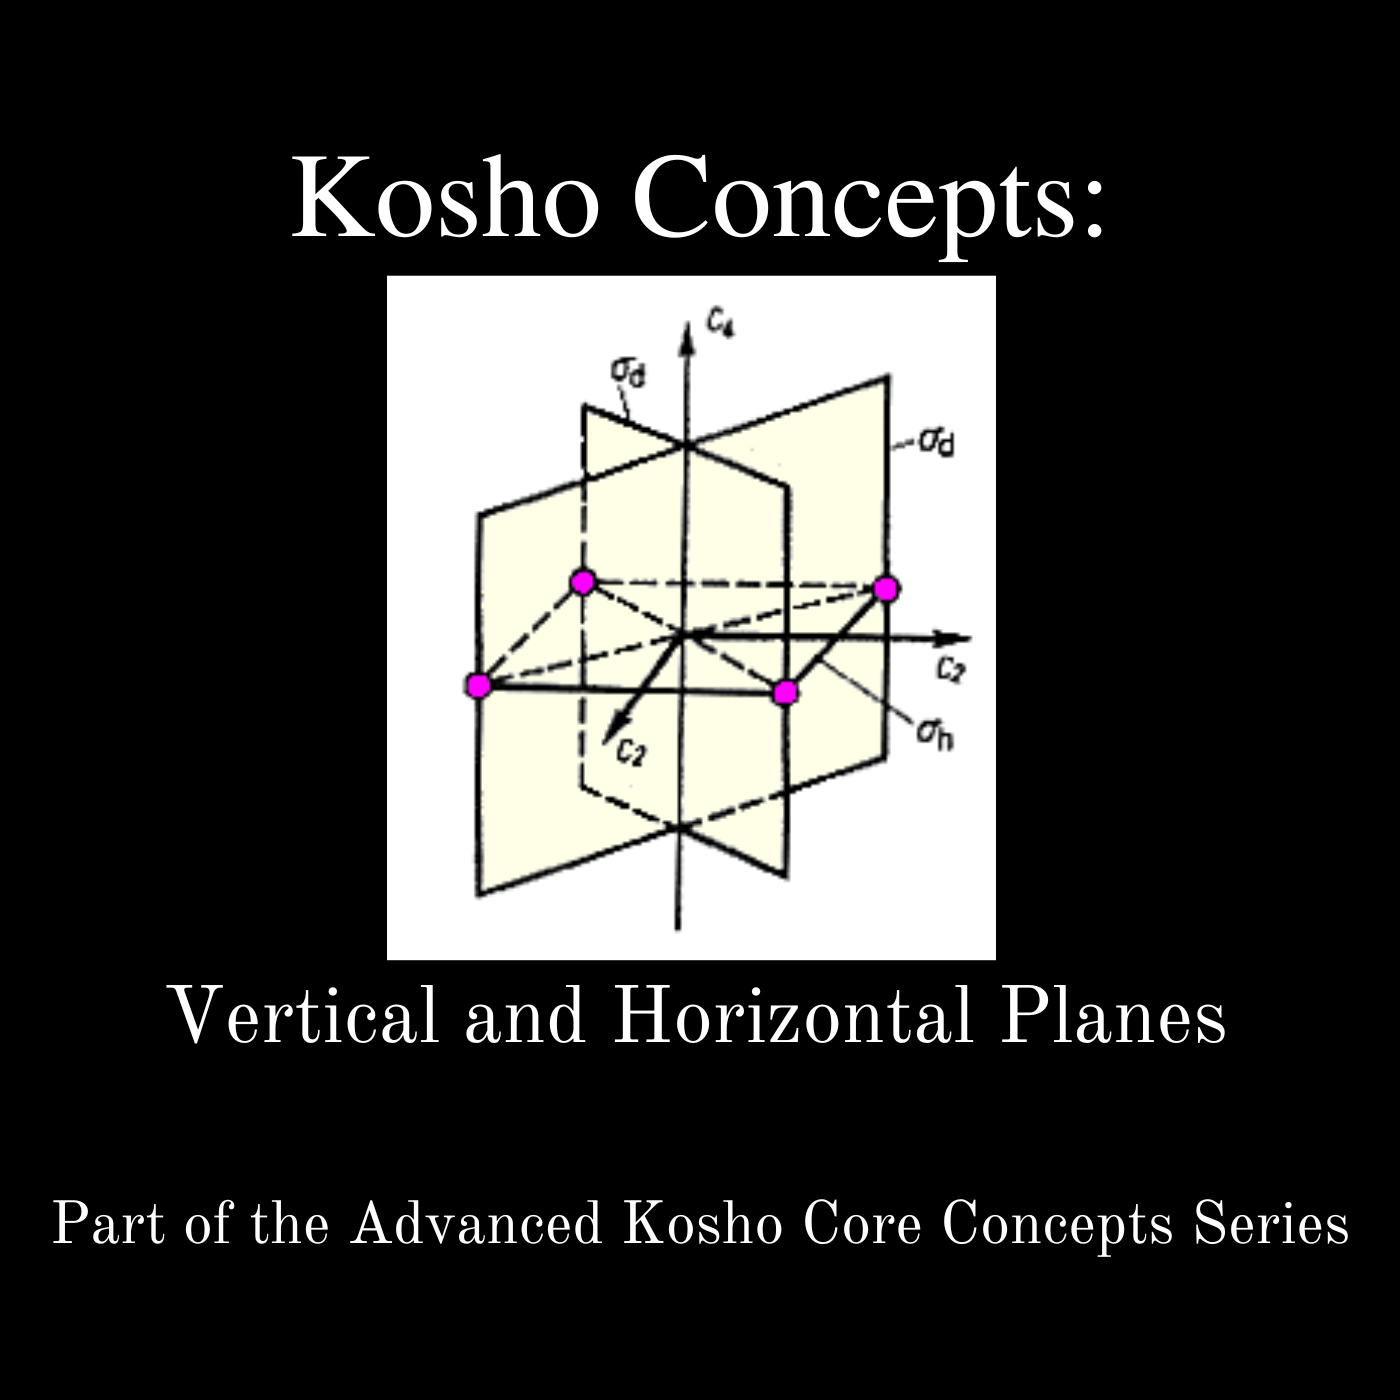 * Kosho Concepts: Vertical and Horizontal Planes